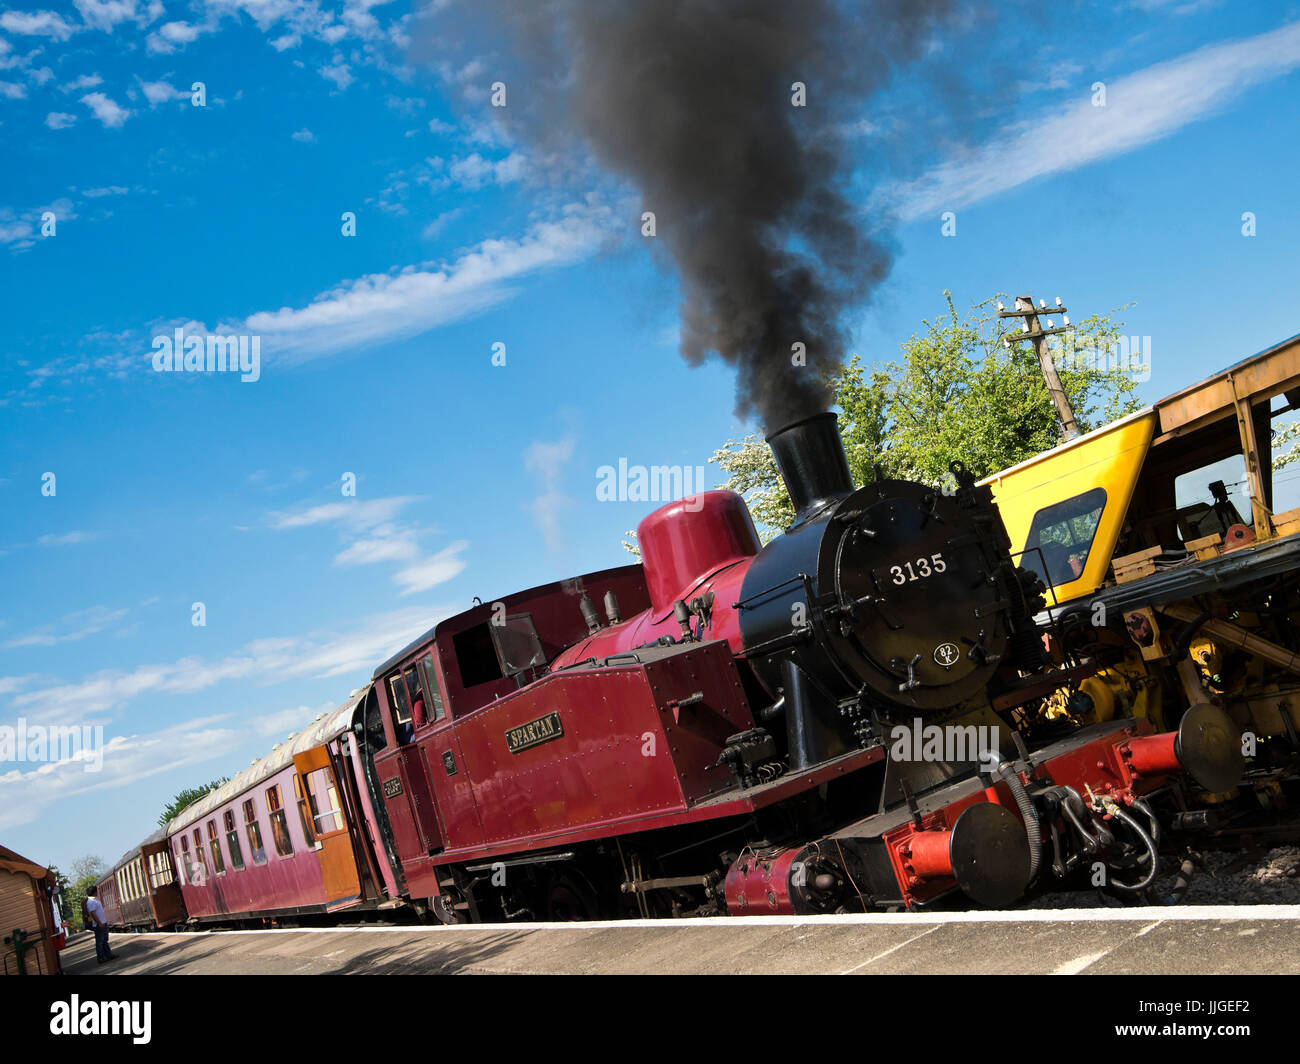 Horizontal view of a steam locomotive standing at a station platform. Stock Photo